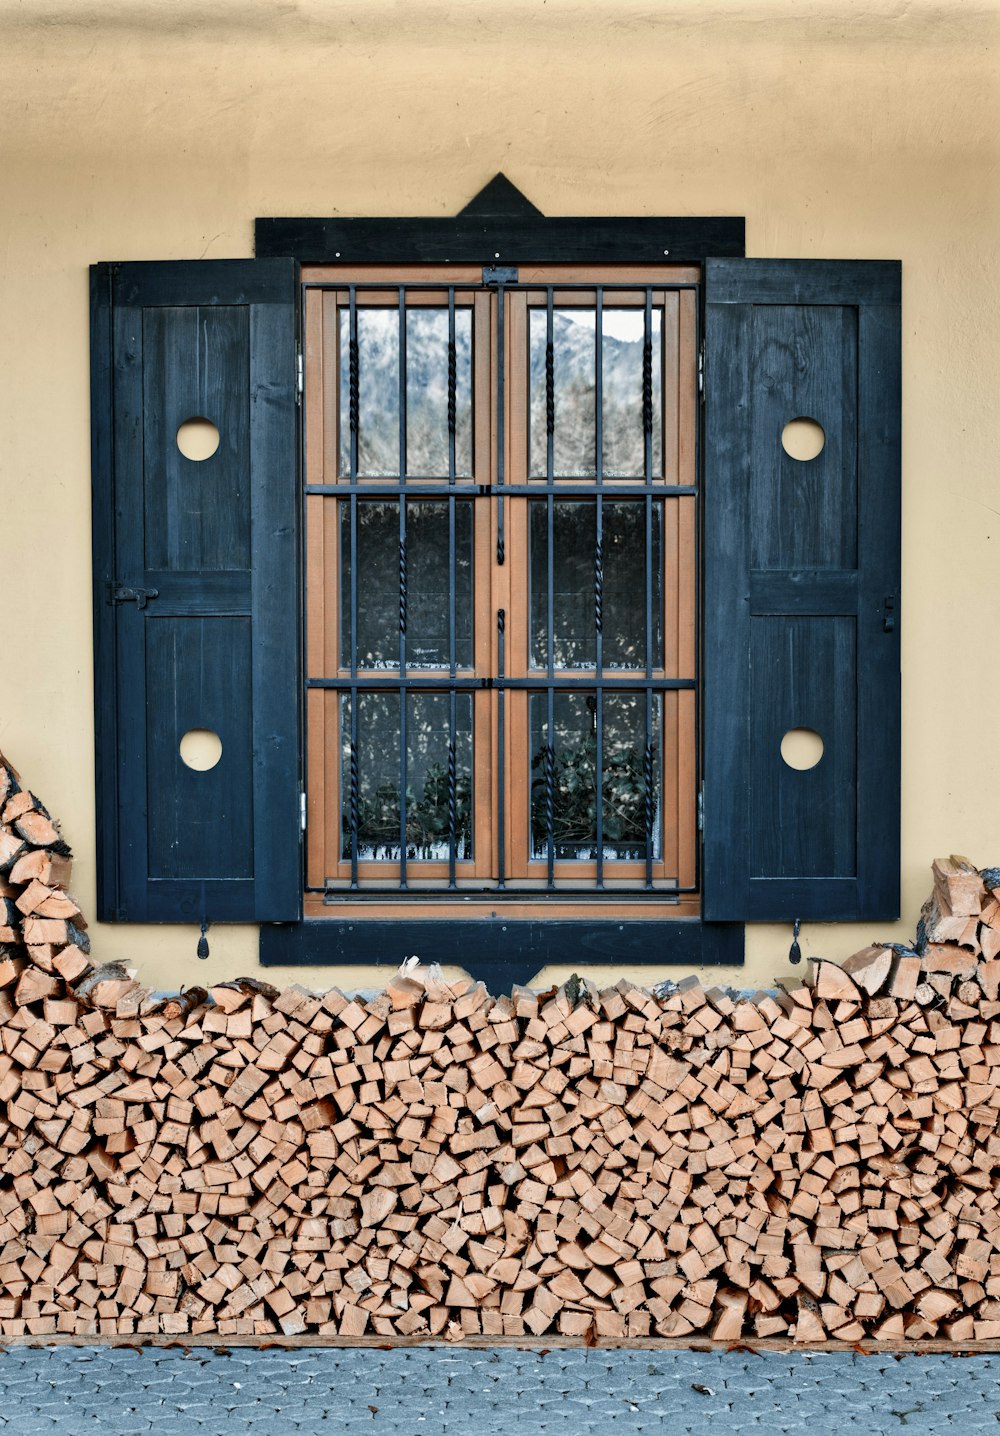 a stack of firewood sitting in front of a window